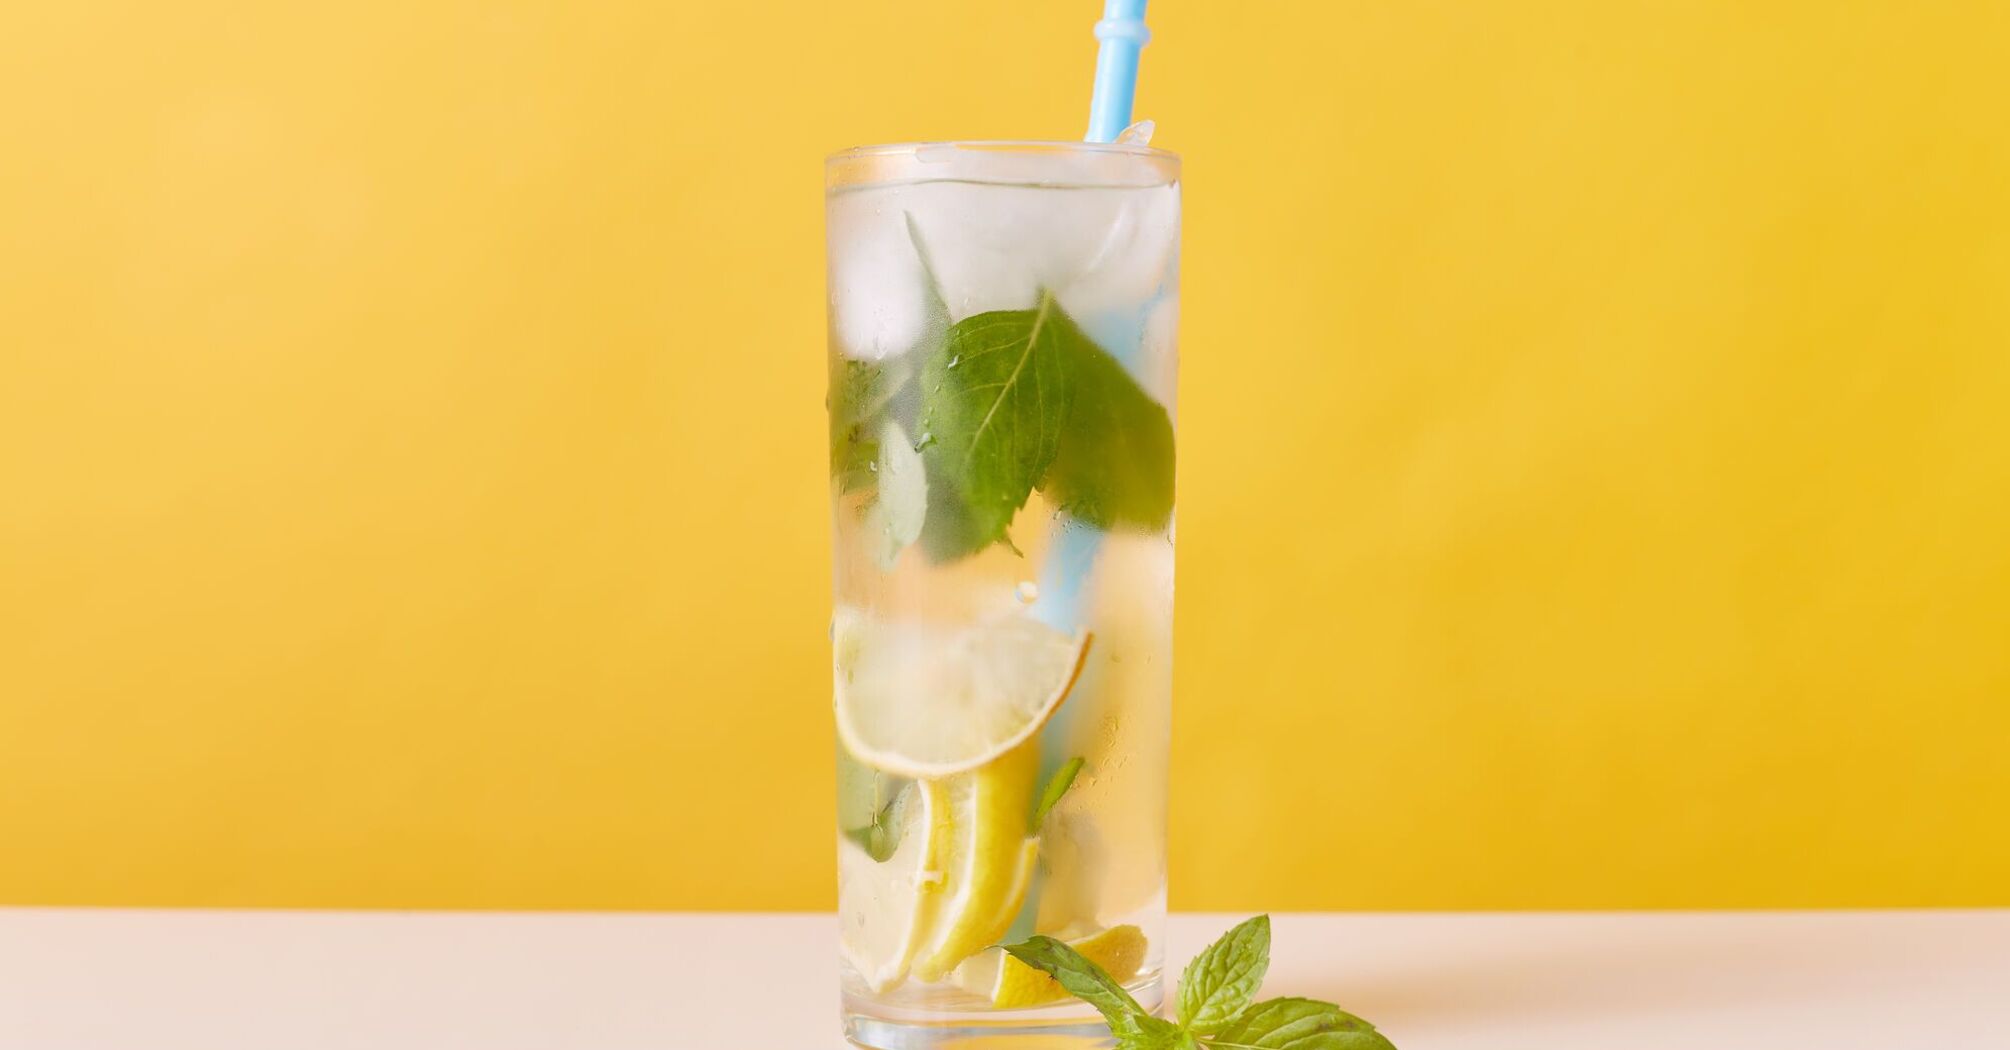 Mojito lemonade: recipe for a budget and refreshing drink